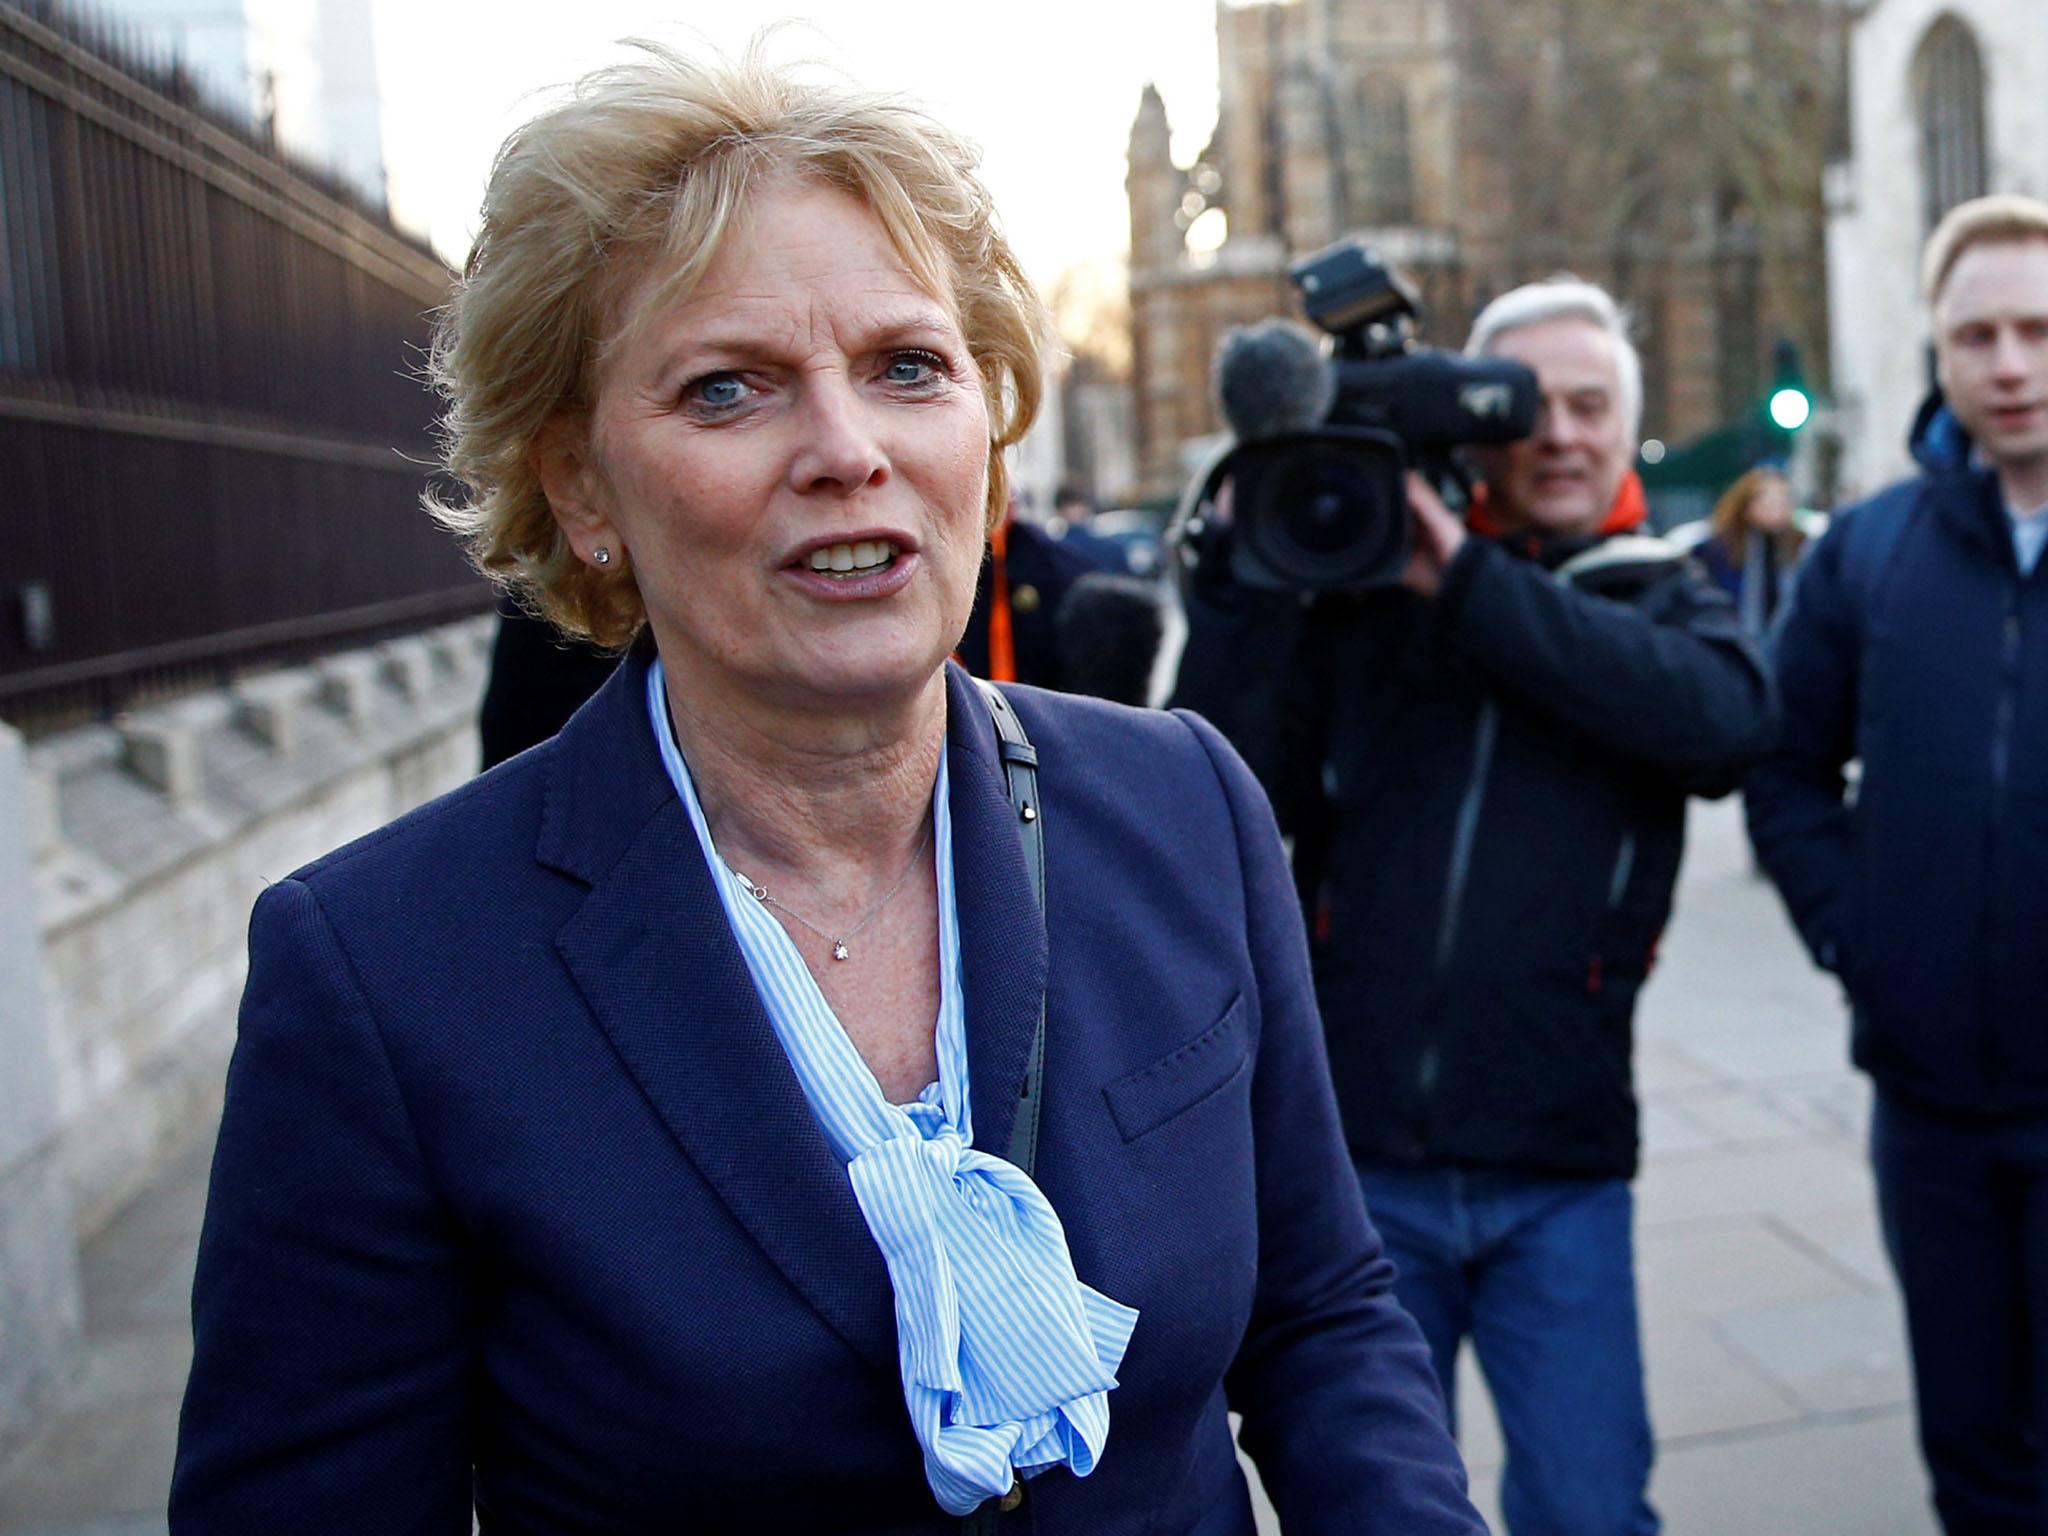 Anna Soubry is leader of The Independent Group for Change and is a prominent anti-Brexit MP